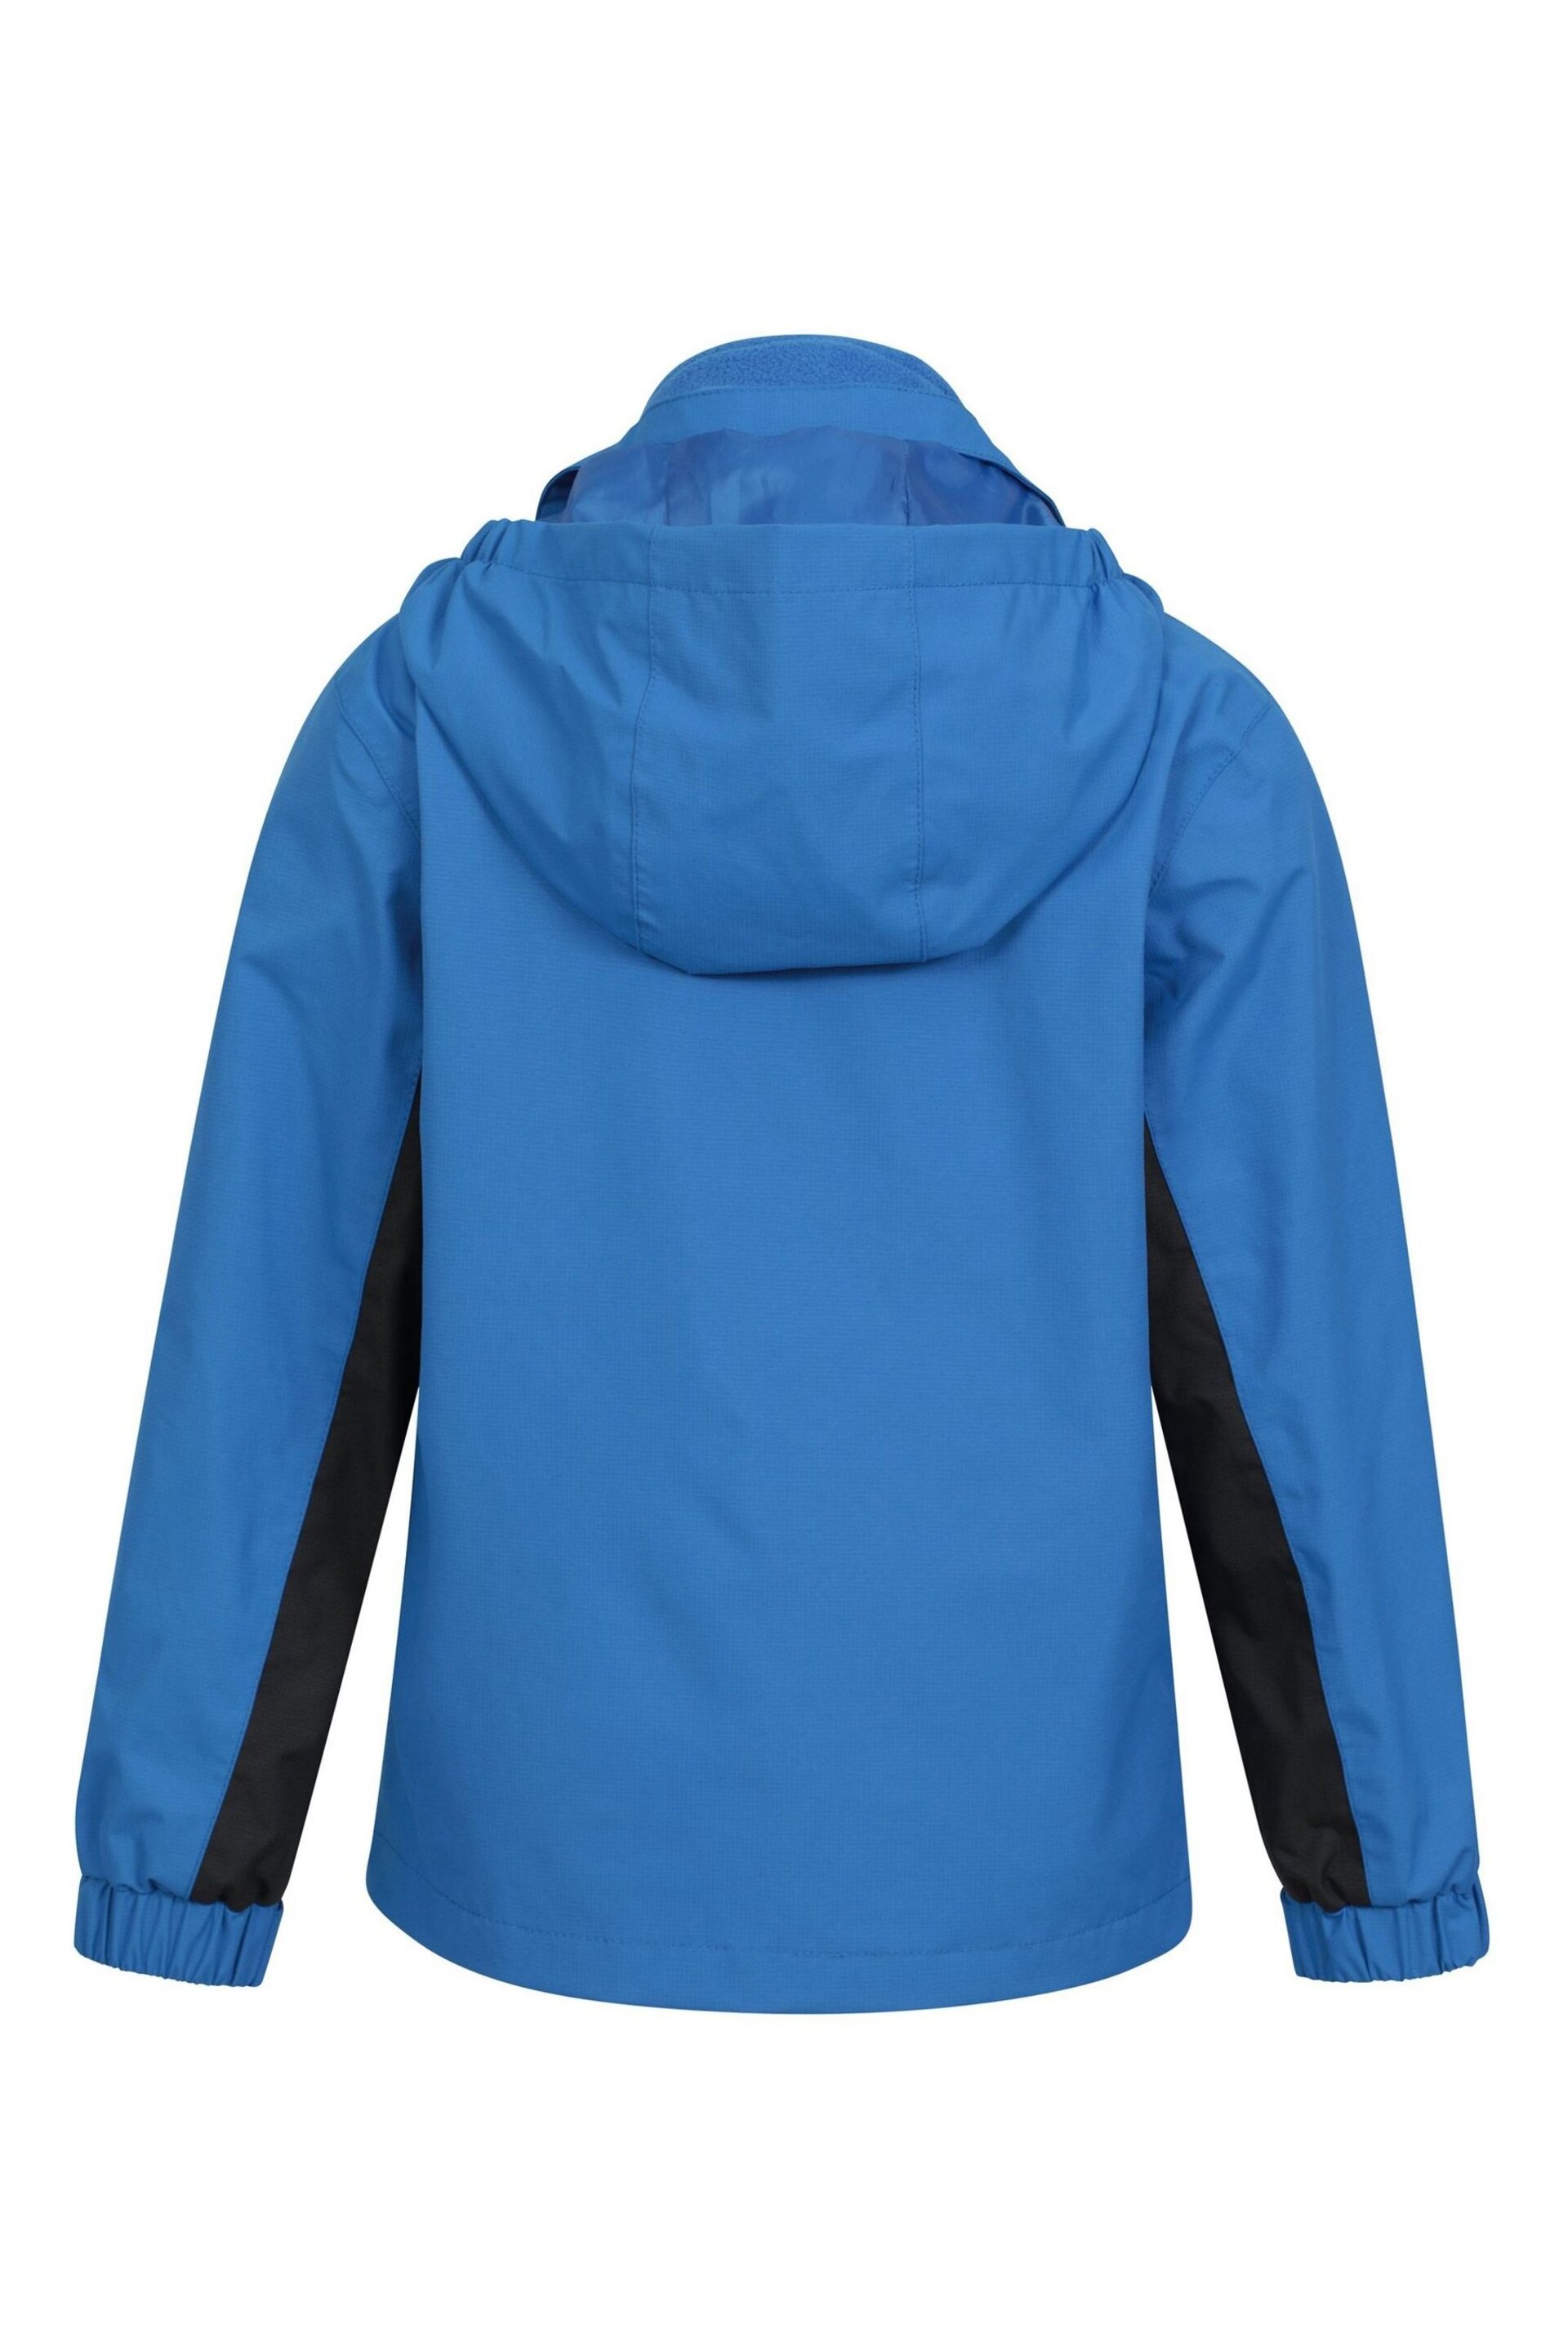 Mountain Warehouse Blue Kids Cannonball 3 in 1 Breathable and Waterproof Jacket - Image 4 of 5